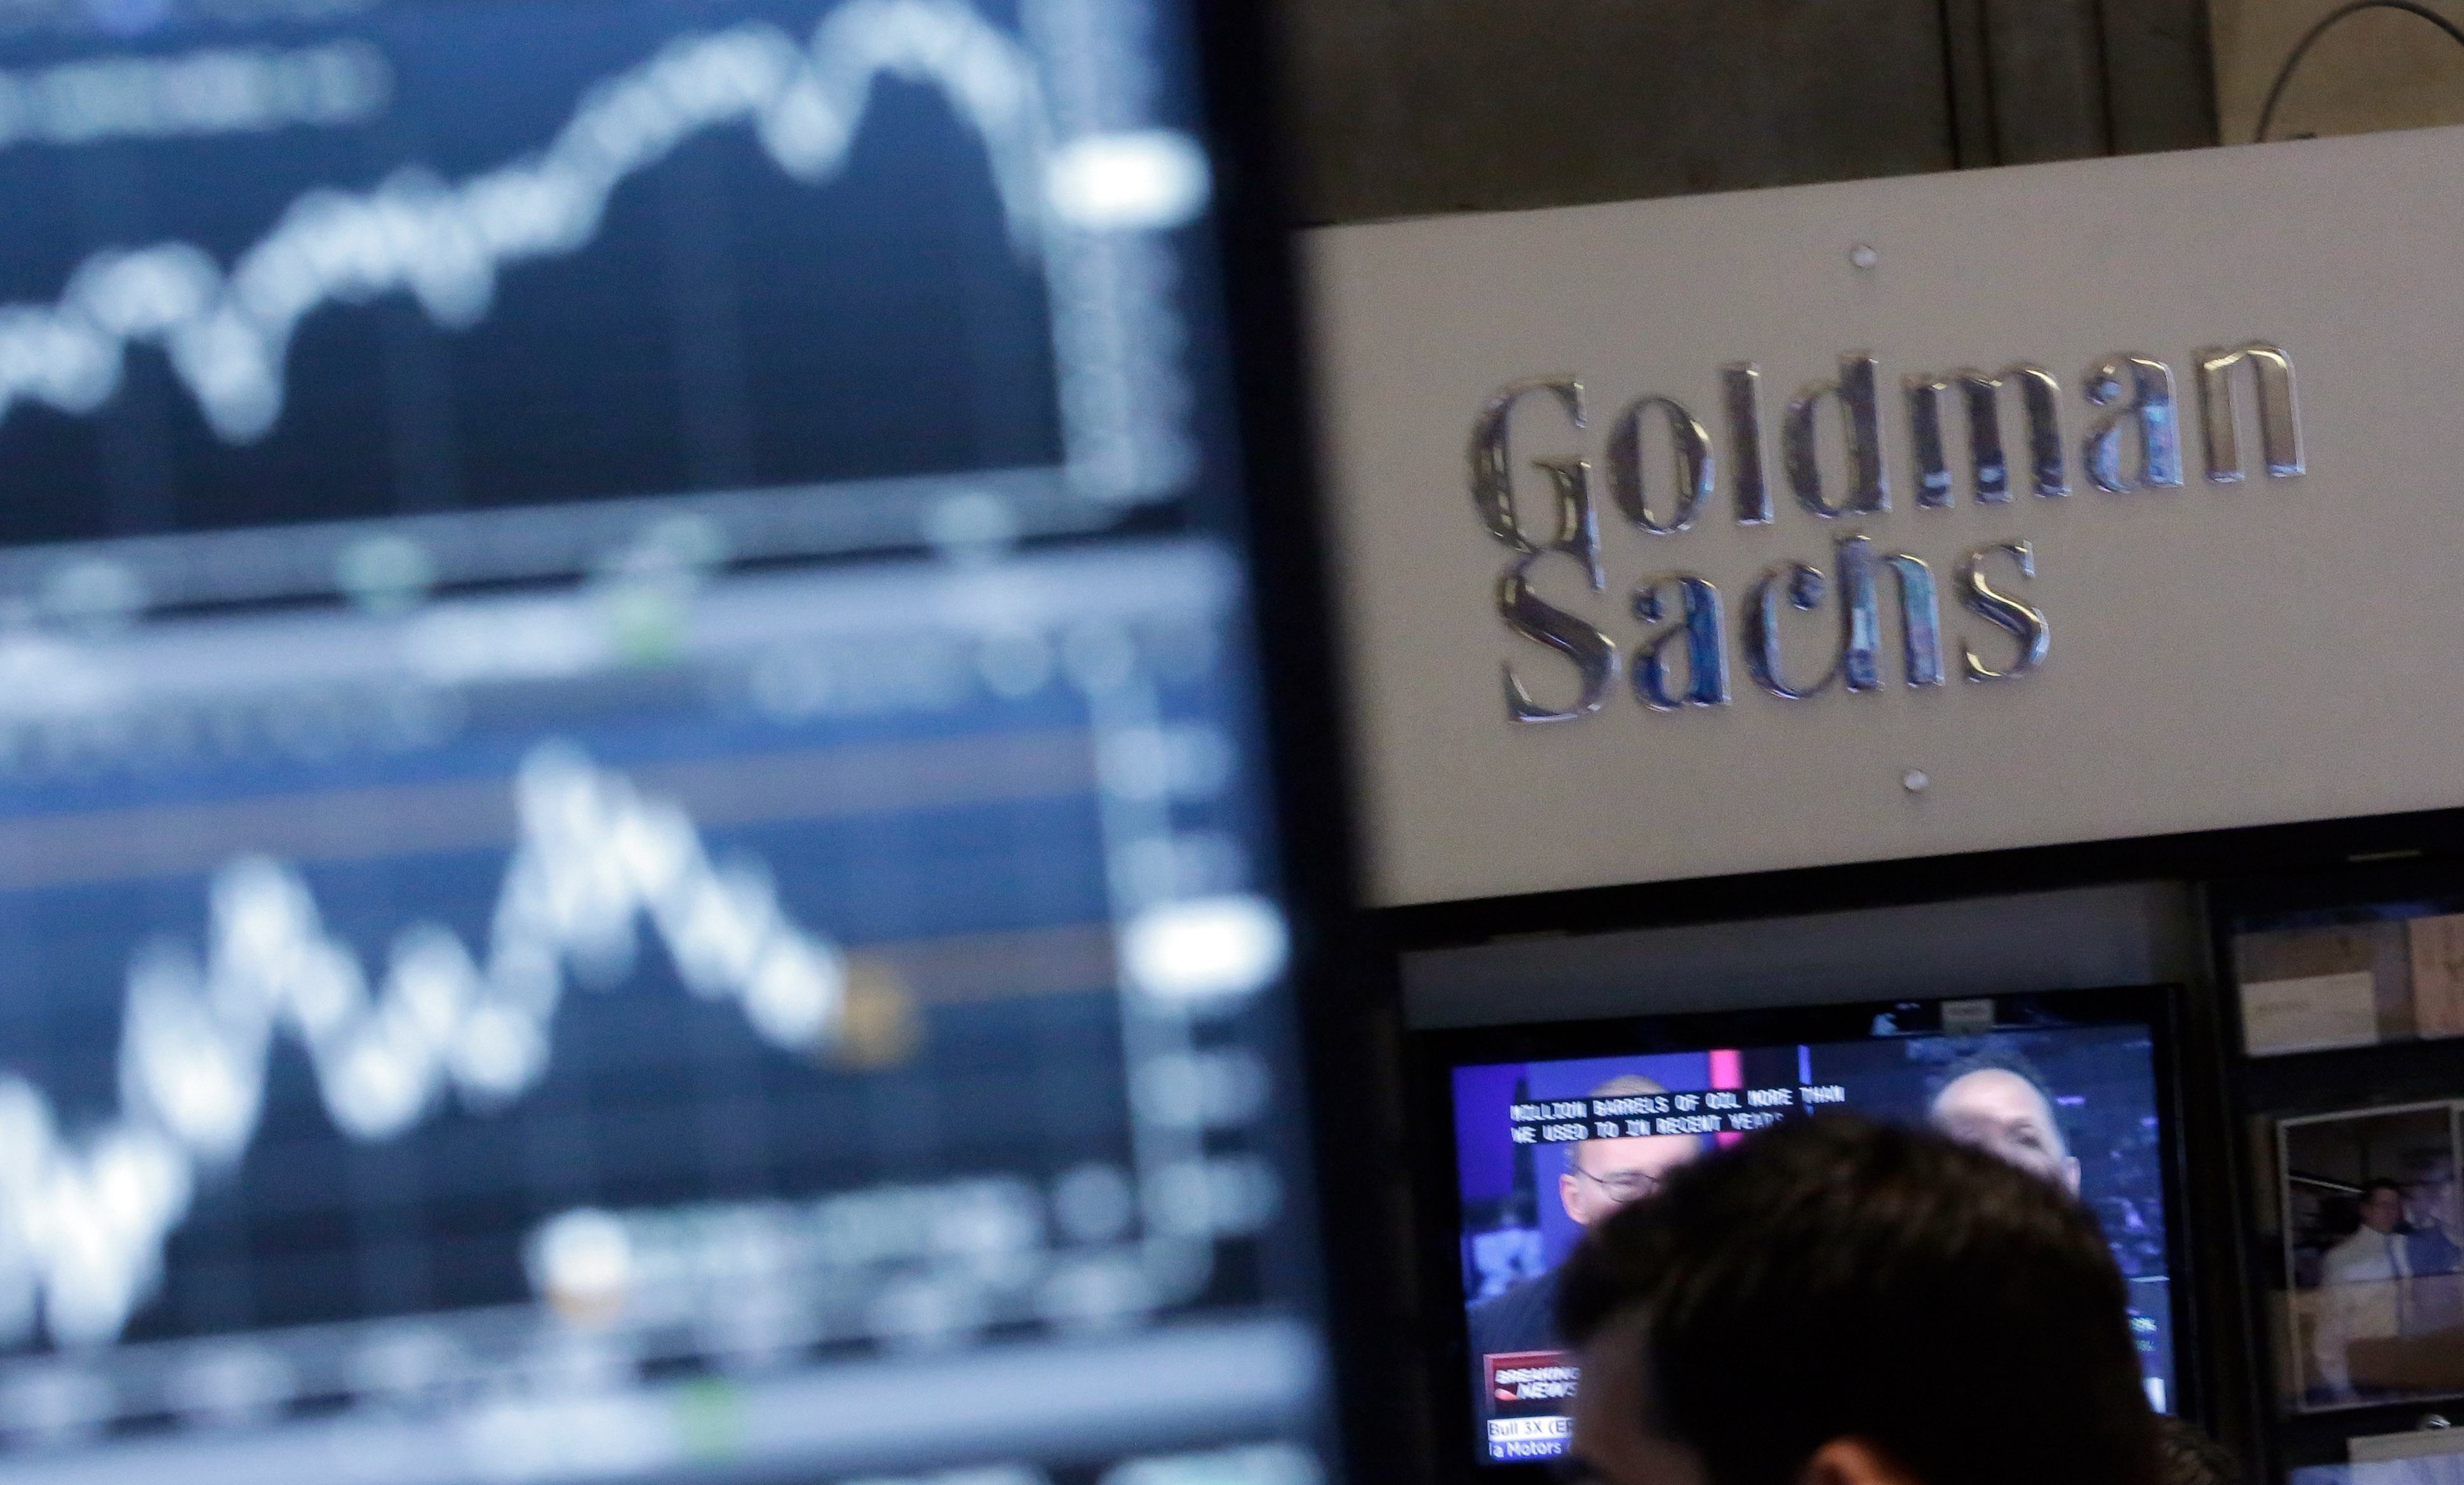 An image of a screen at a trading post on the floor of the New York Stock Exchange is juxtaposed with the Goldman Sachs booth